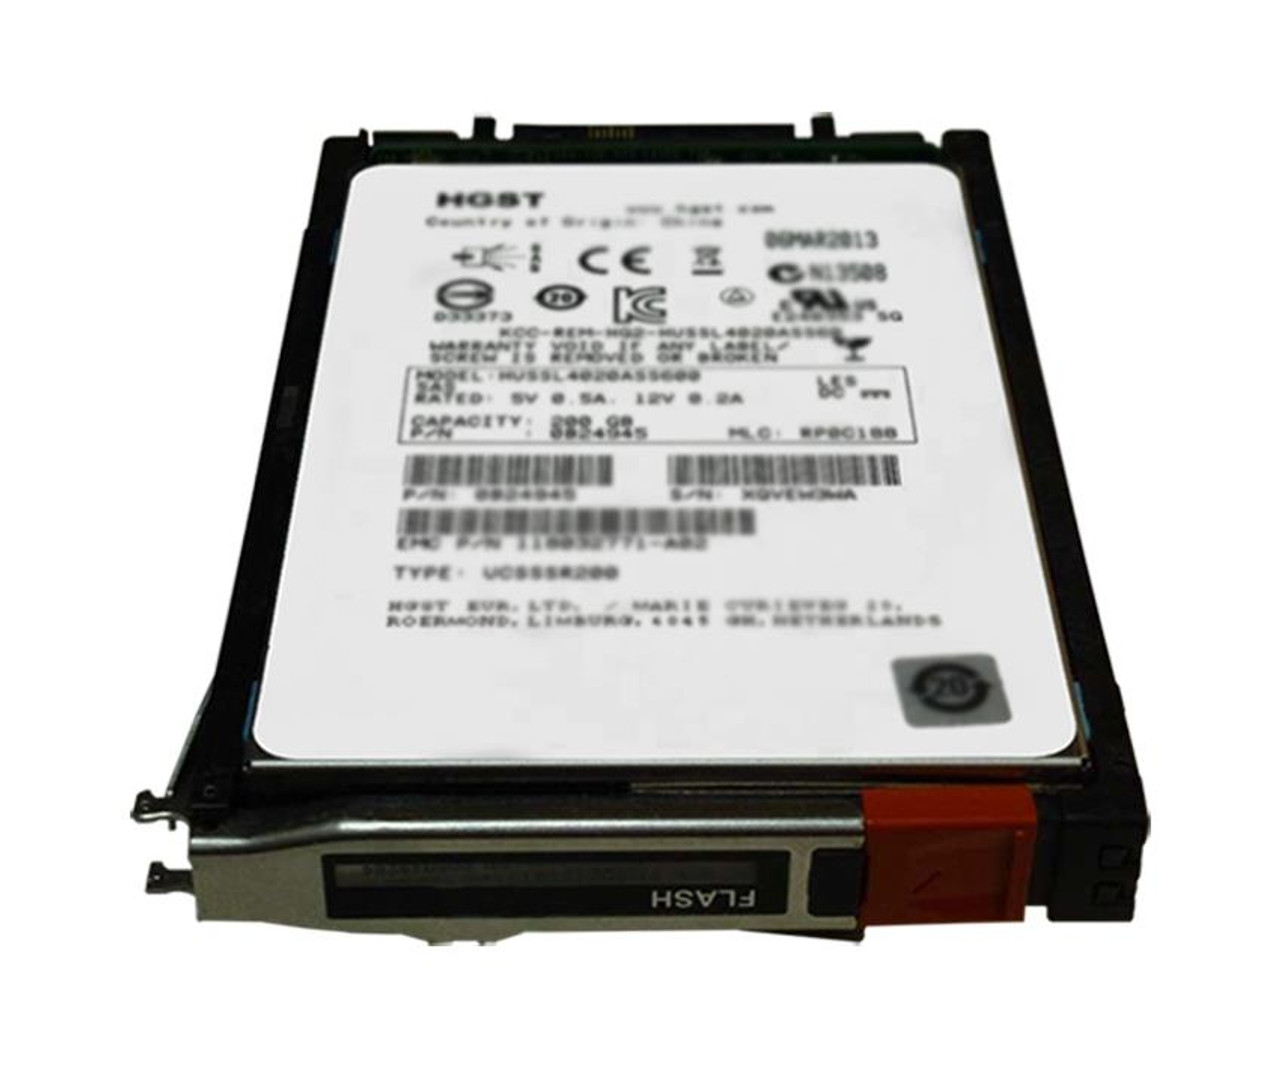 N5-2S6FX-800 EMC 800GB SAS 6Gbps 2.5-inch Internal Solid State Drive (SSD) for VNXe1600 25 x 2.5 Enclosure